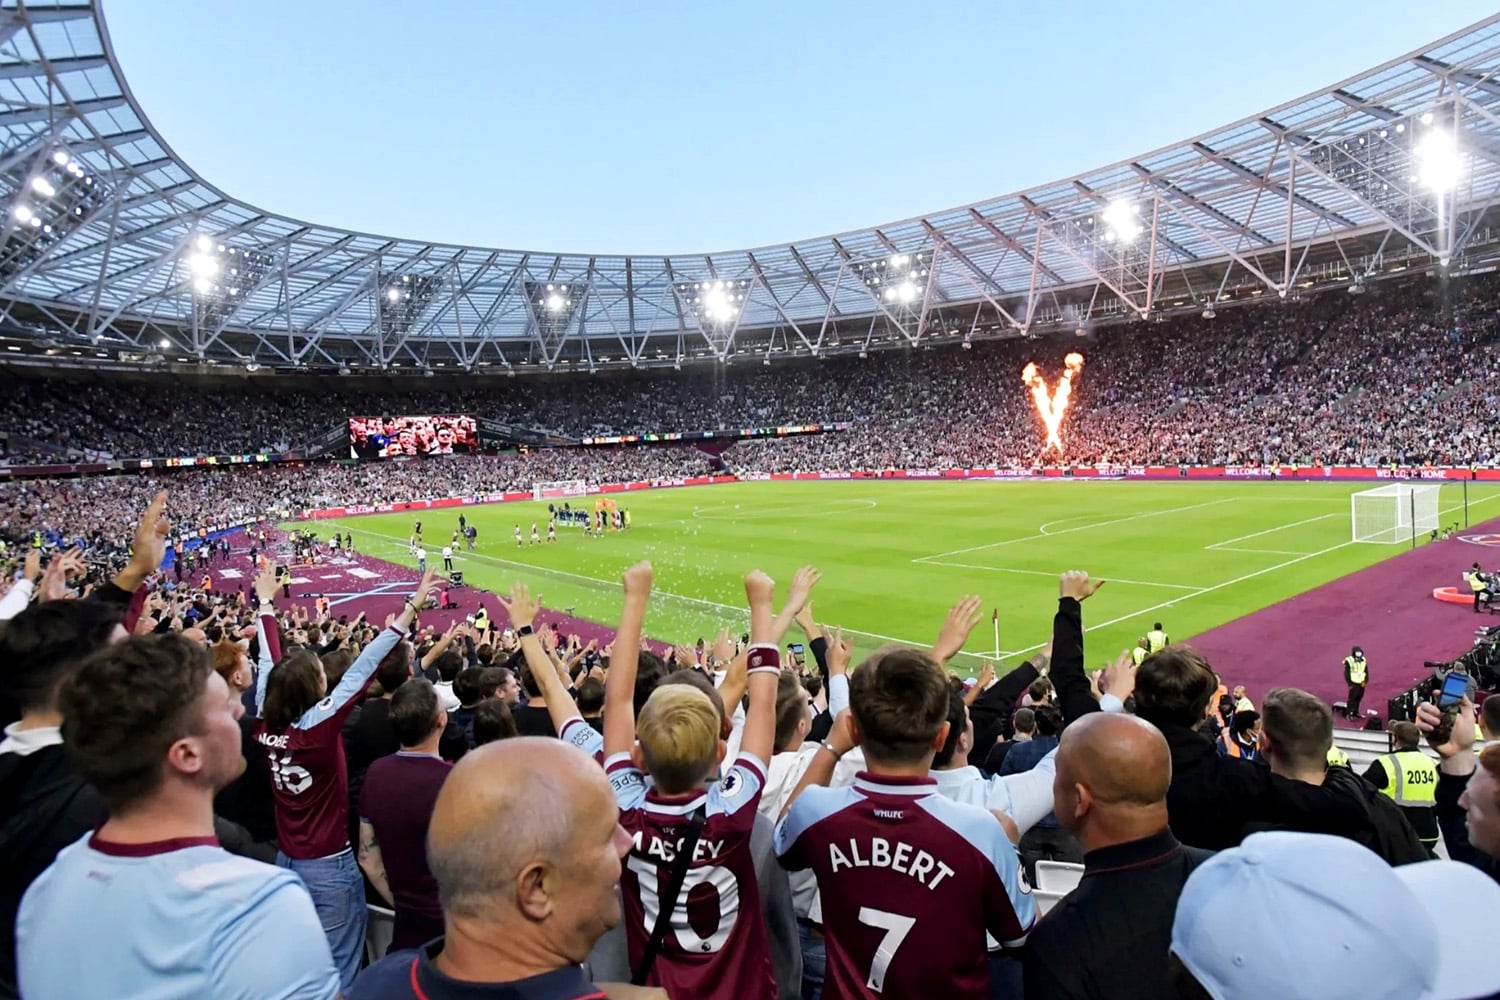 A view of fans inside London Stadium before a West Ham United home match.